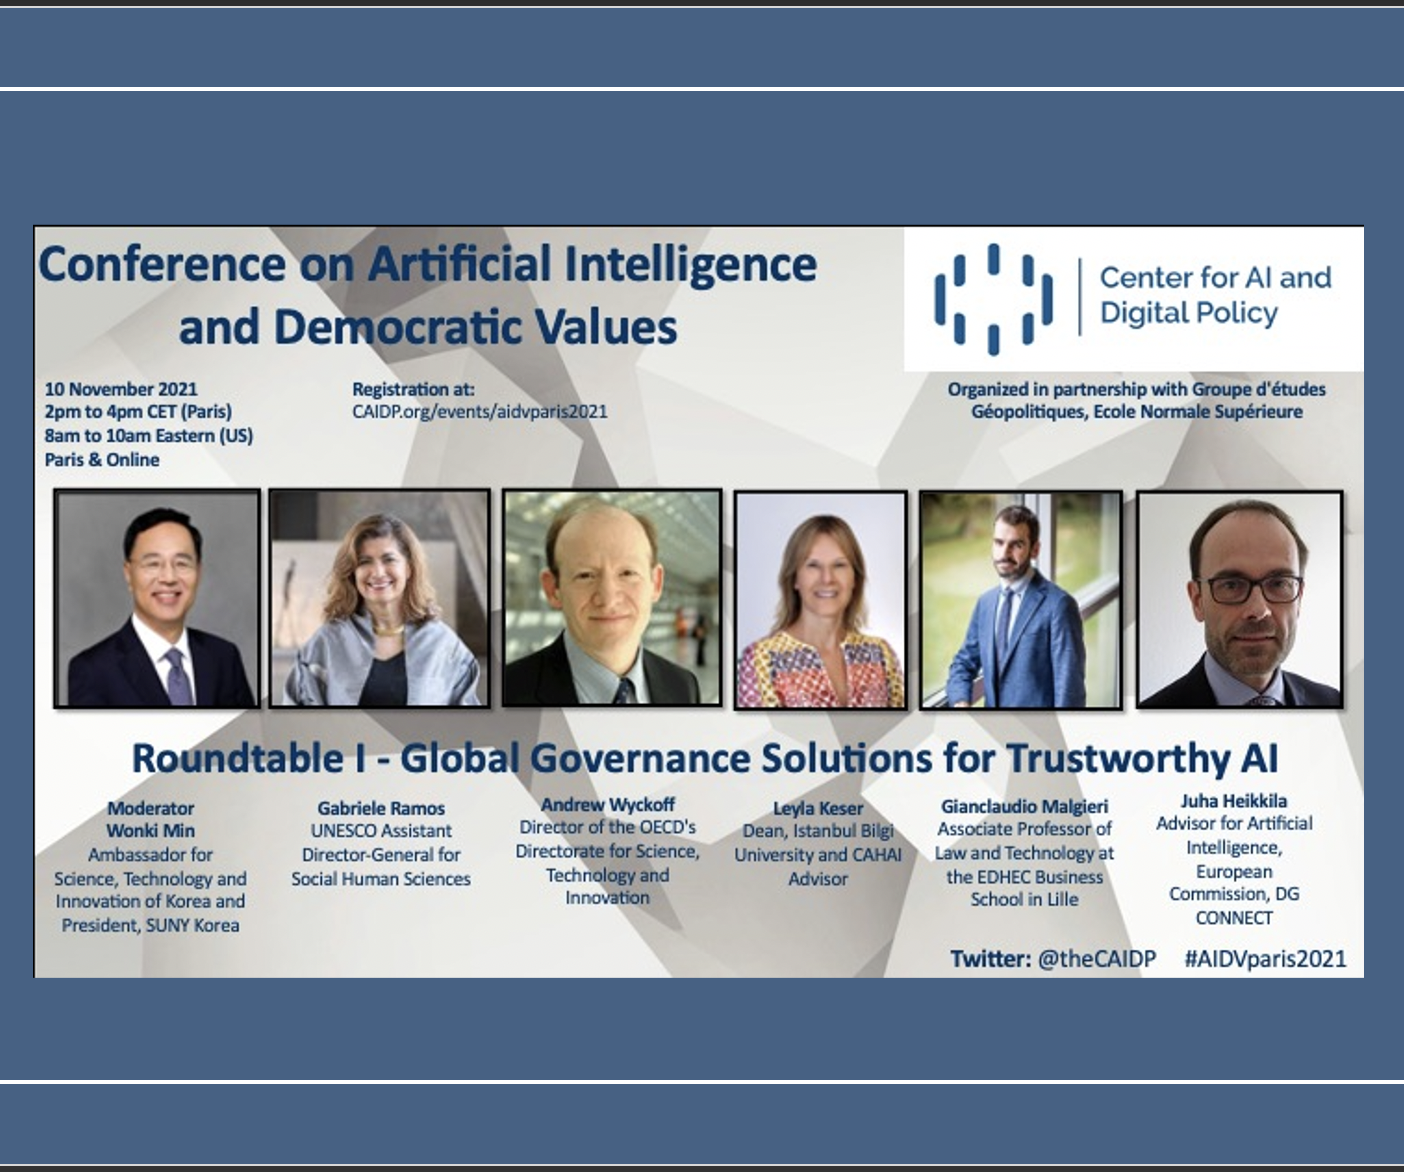 High-level international event on AI policy with Malgieri and world institutions